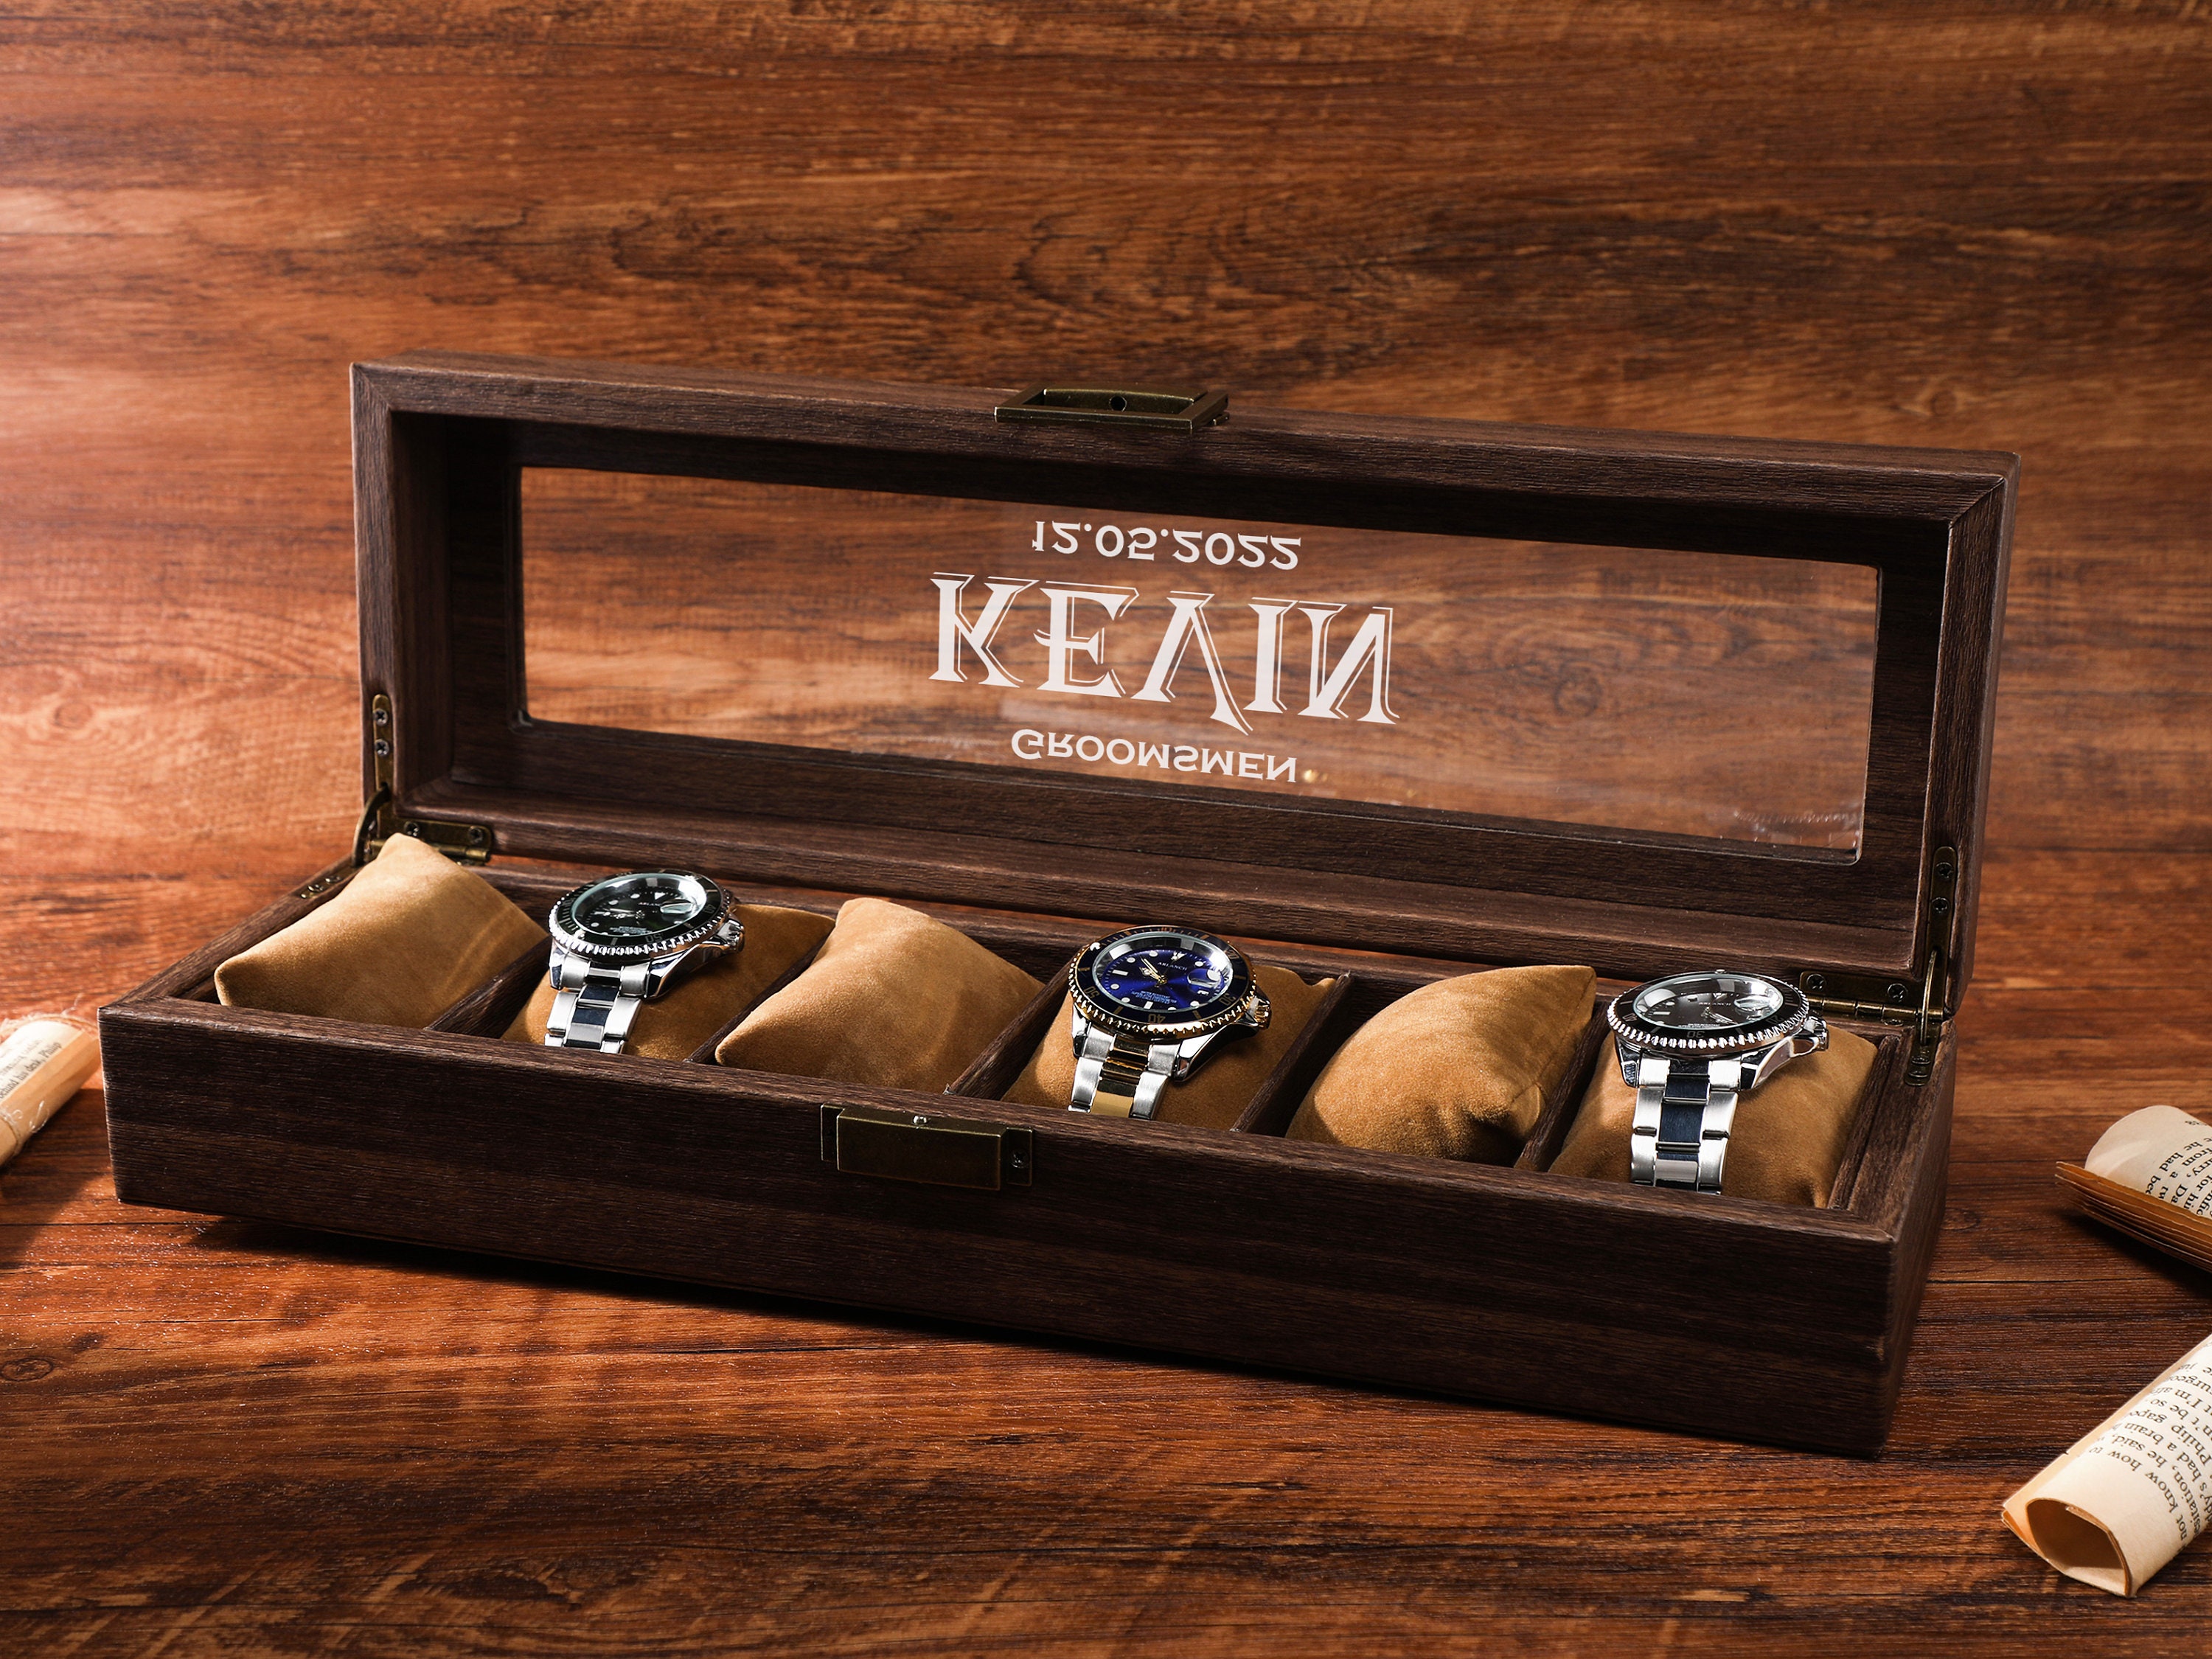 Engraved Wooden Watch for Men Top Brand Luxury Chronograph Military Quartz Watches GT050-1A